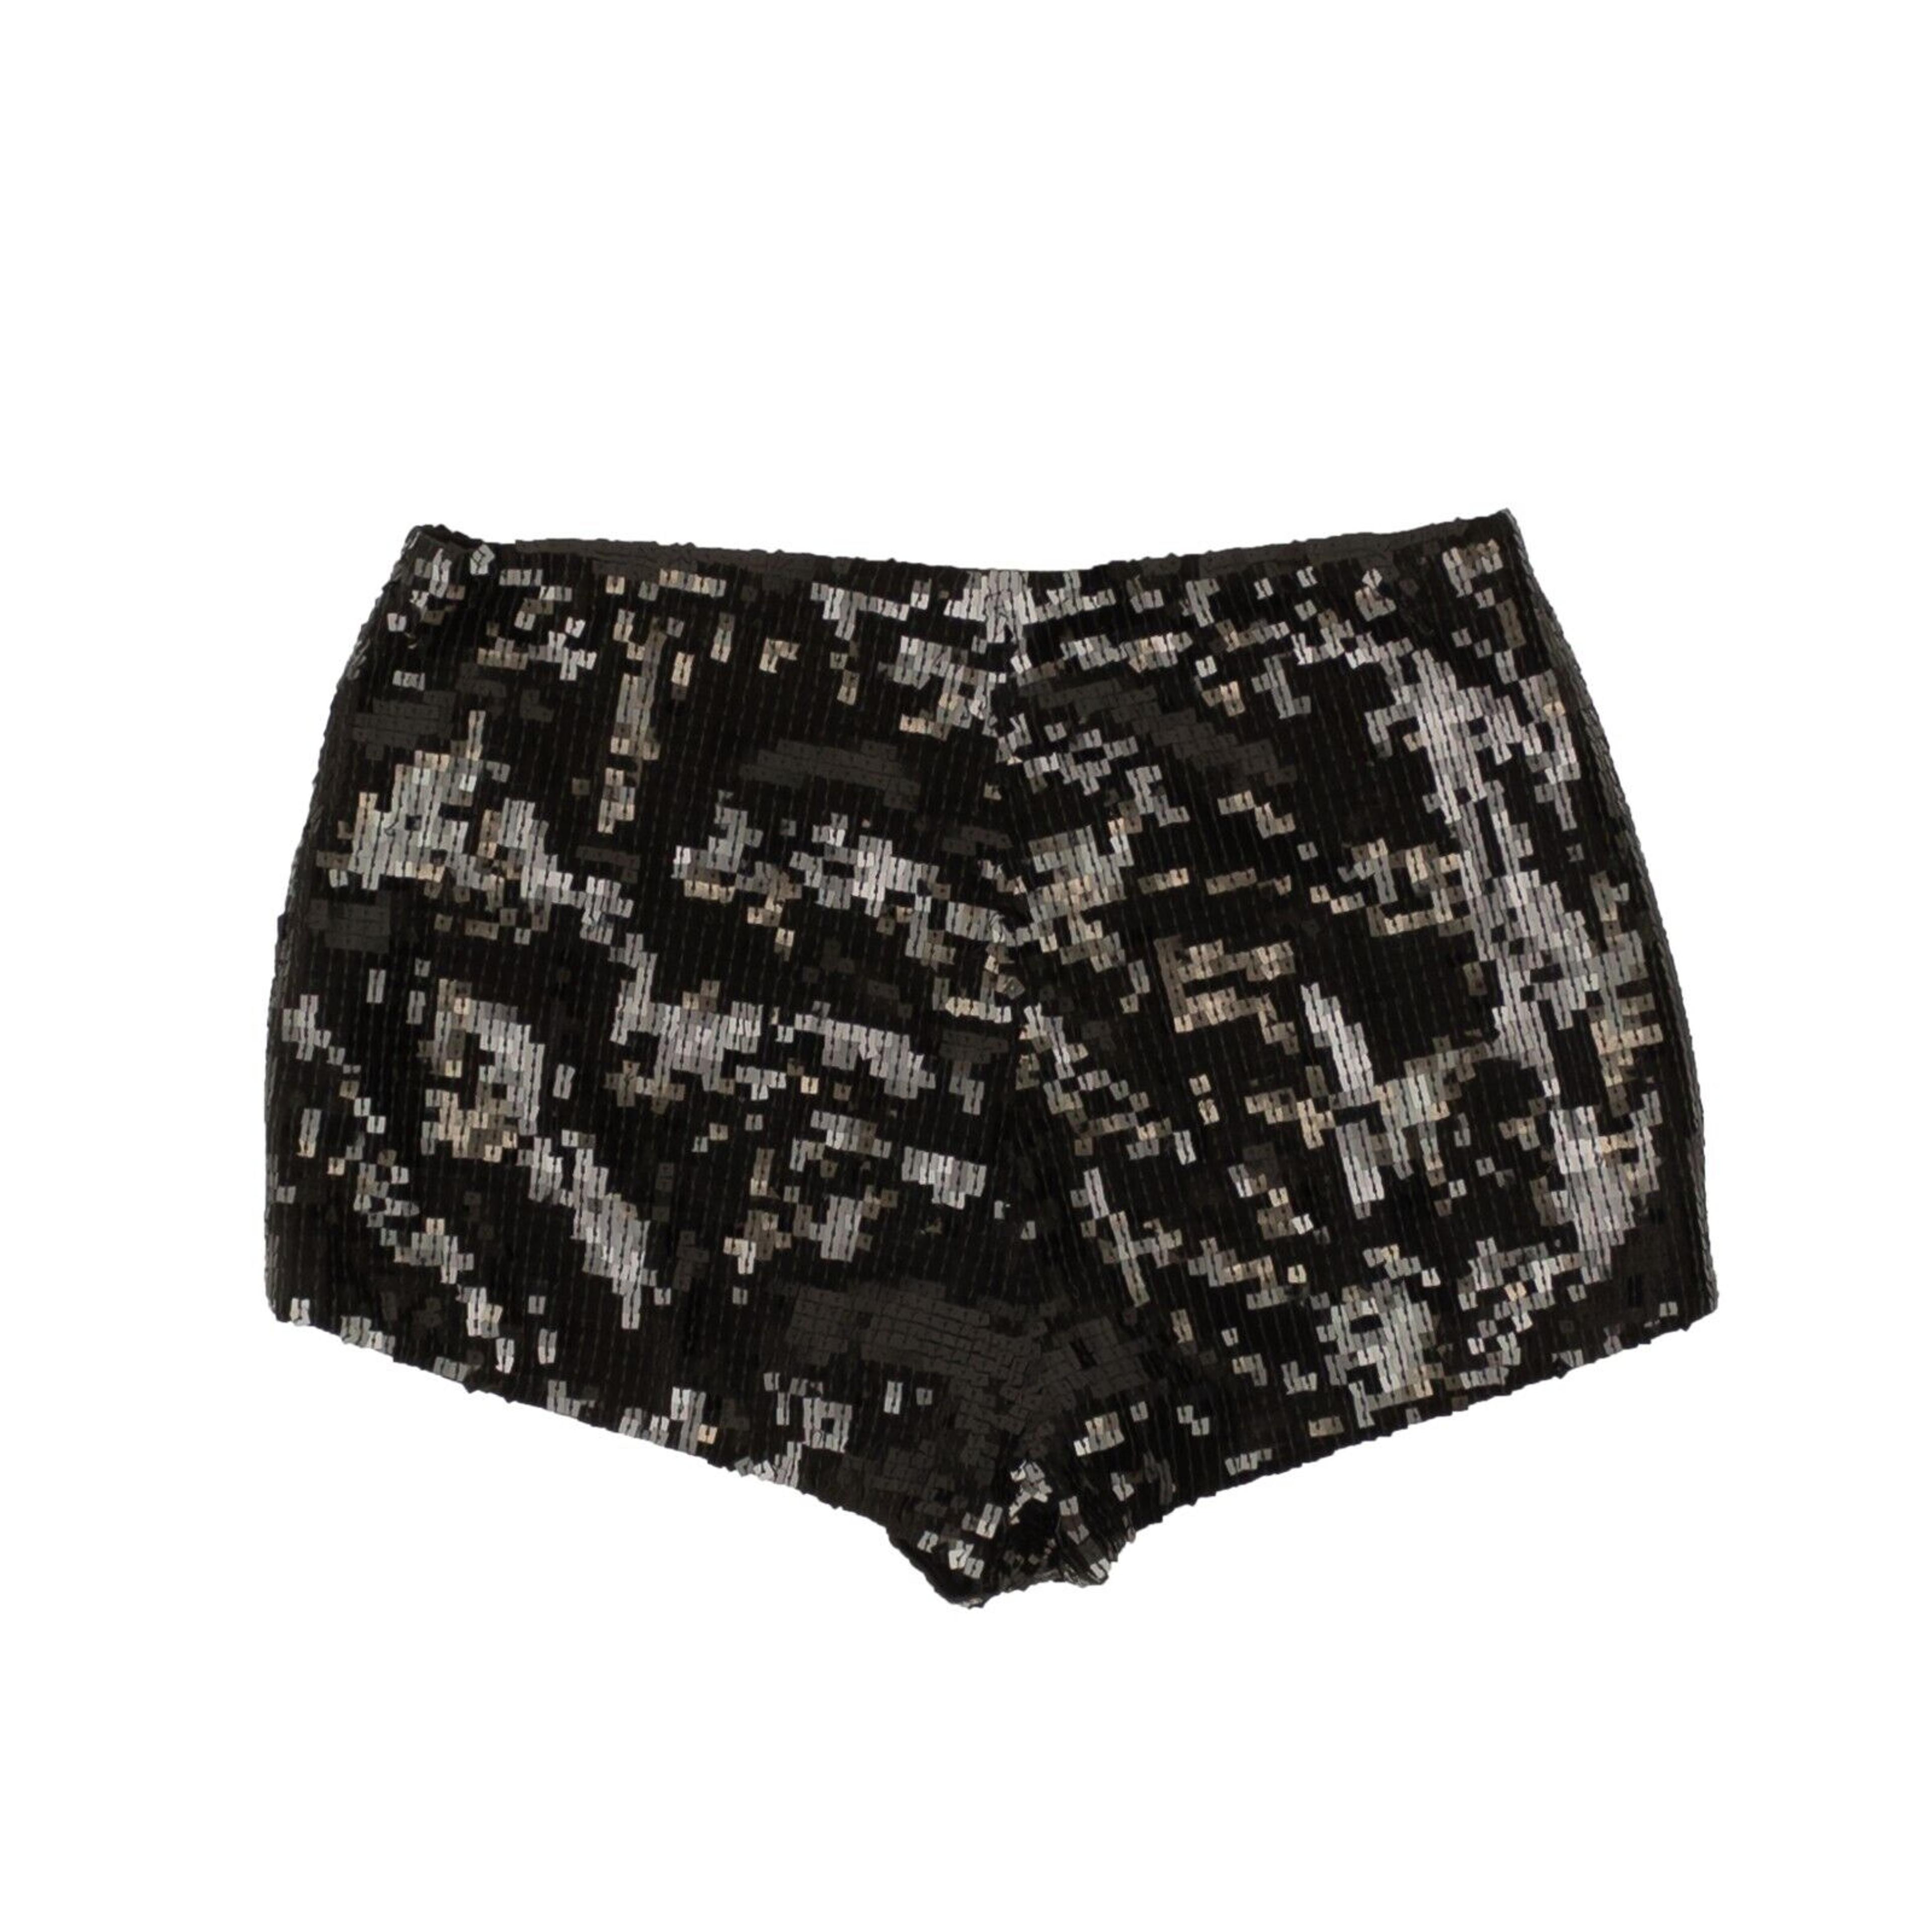 Alternate View 2 of Women's Black Sequin Embroidered Shorts